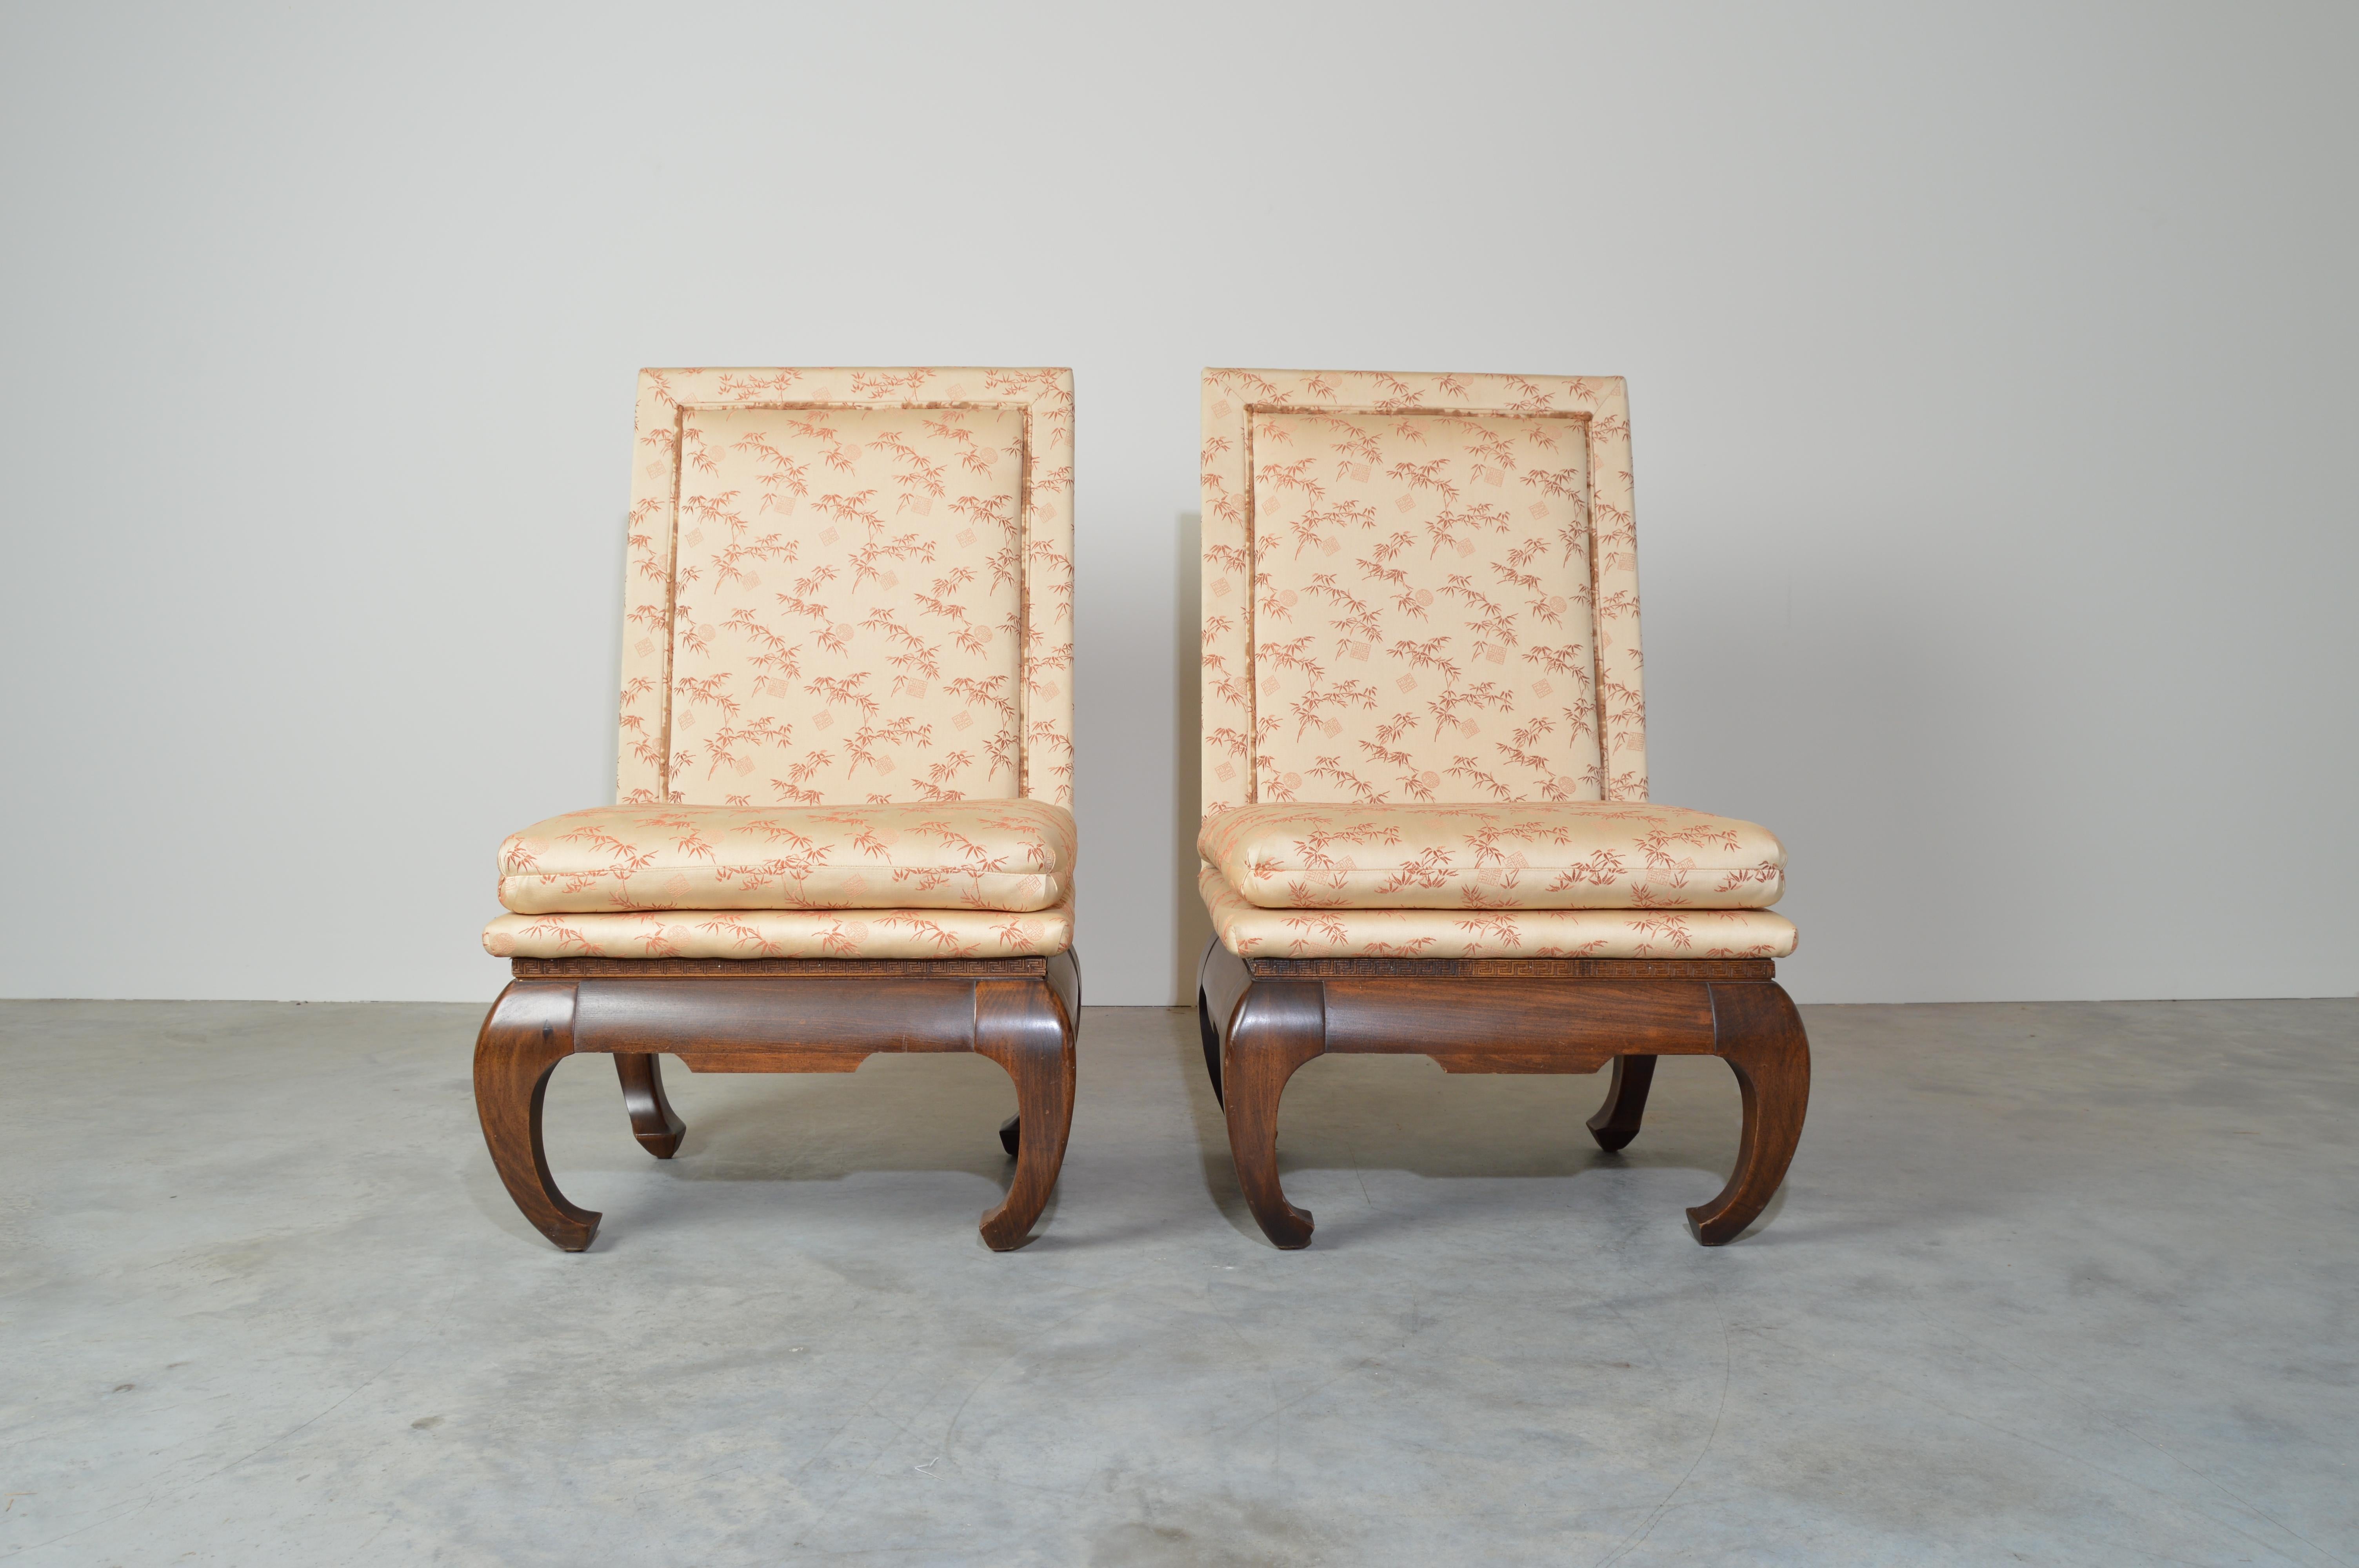 A beautiful pair of Ming Style chairs having sculptural mahogany Chong legs under highback seats with scenic Chinese upholstery. Seat cushions clip at the back so they won’t slide. Very comfortable chairs.
Absolutely stunning.
Solid, clean and